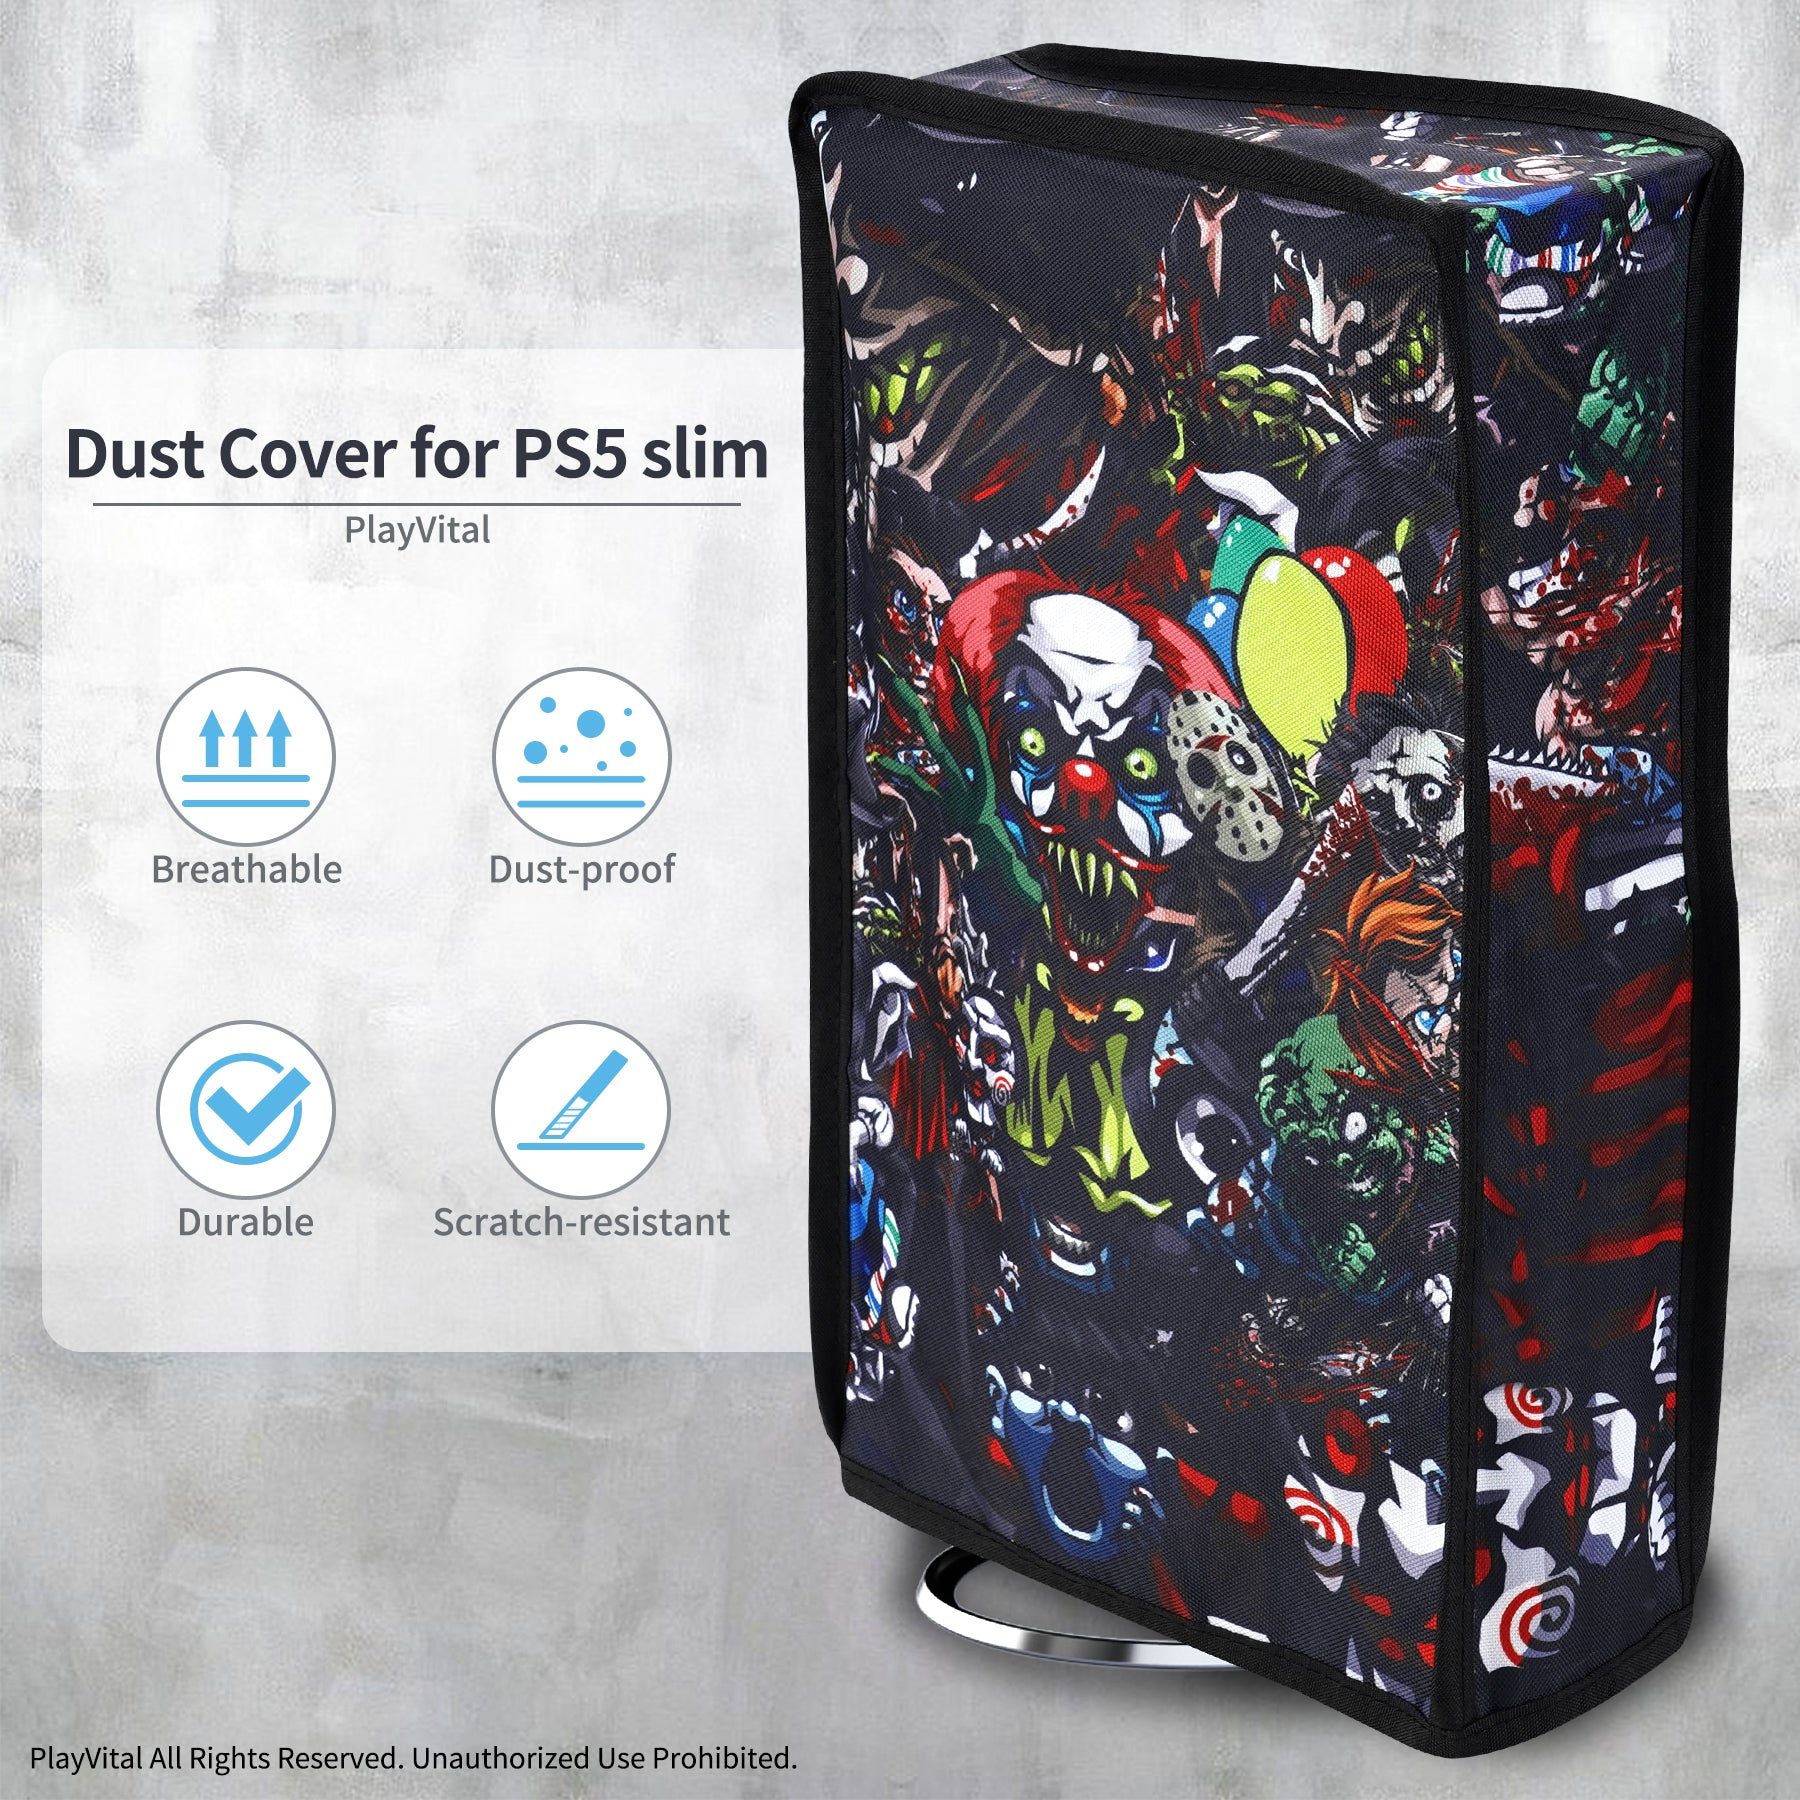 PlayVital Vertical Dust Cover for ps5 Slim Disc Edition(The New Smaller Design), Nylon Dust Proof Protector Waterproof Cover Sleeve for ps5 Slim Console - Scary Party - BMYPFH005 PlayVital